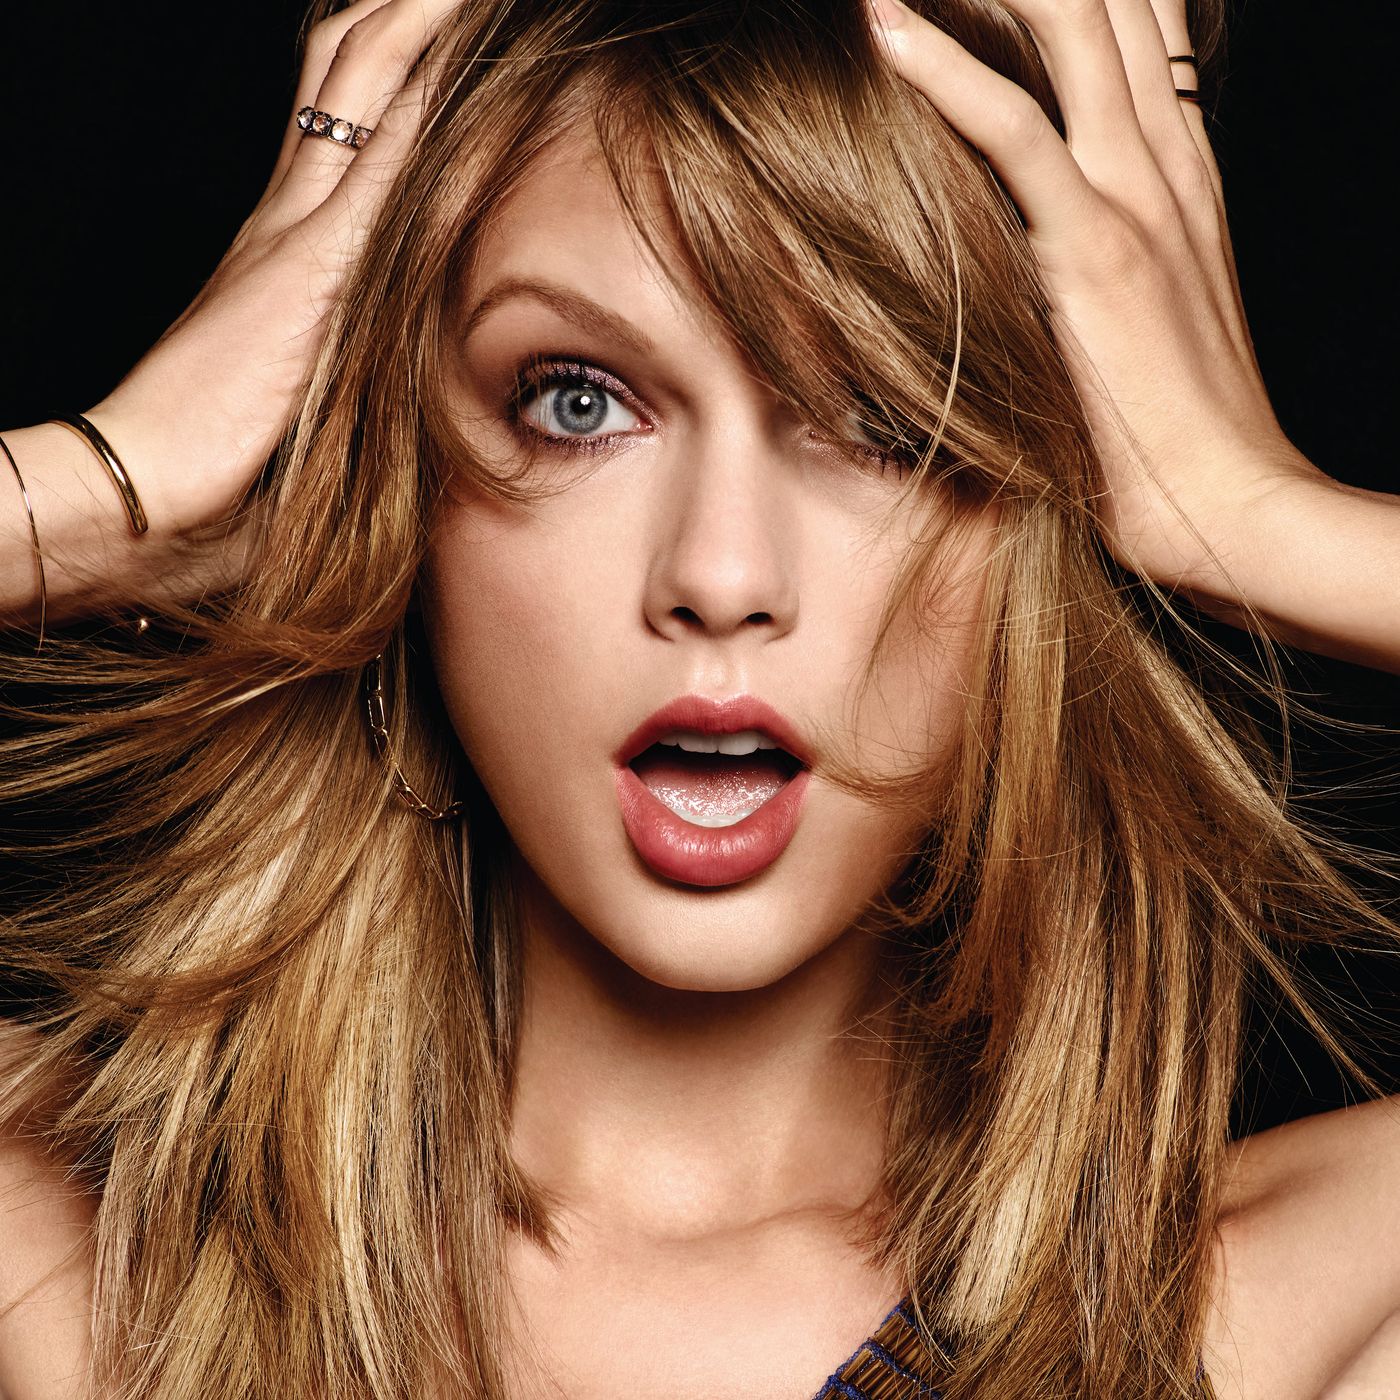 Sultry Songs of Taylor Swift: Gallery of Her Most Sexy Hits!